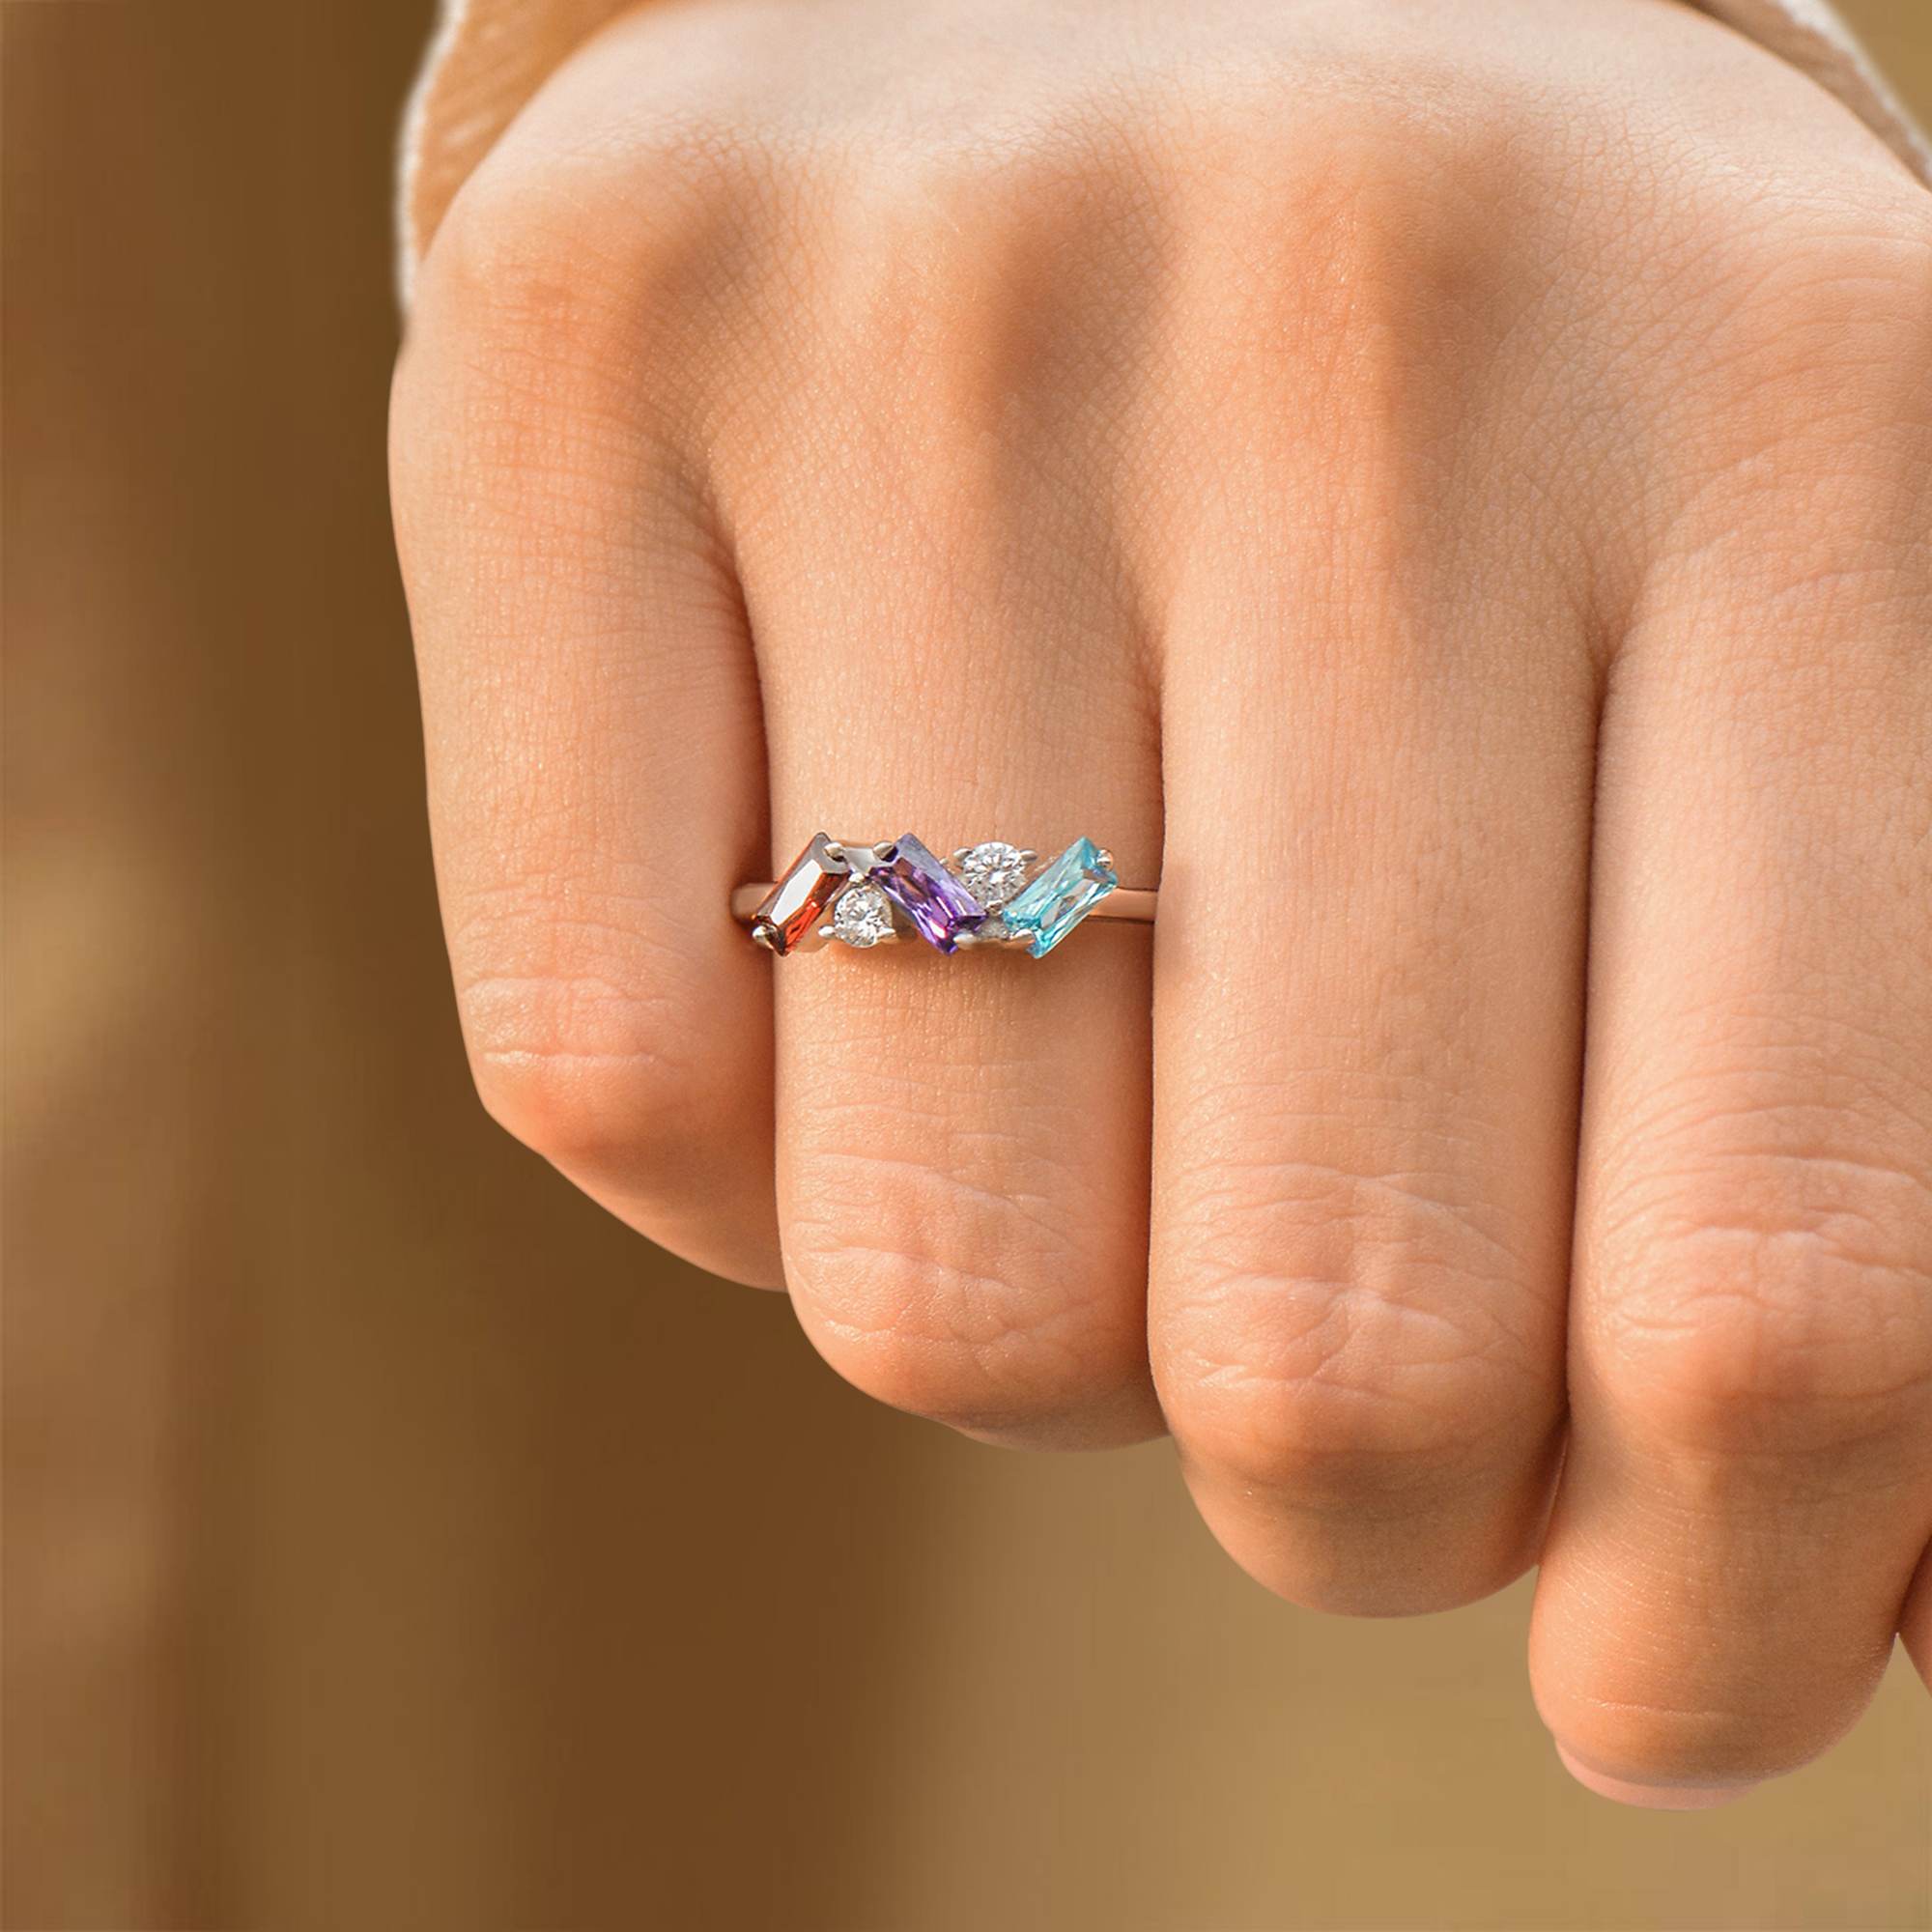 Personalized Baguette Birthstone Ring